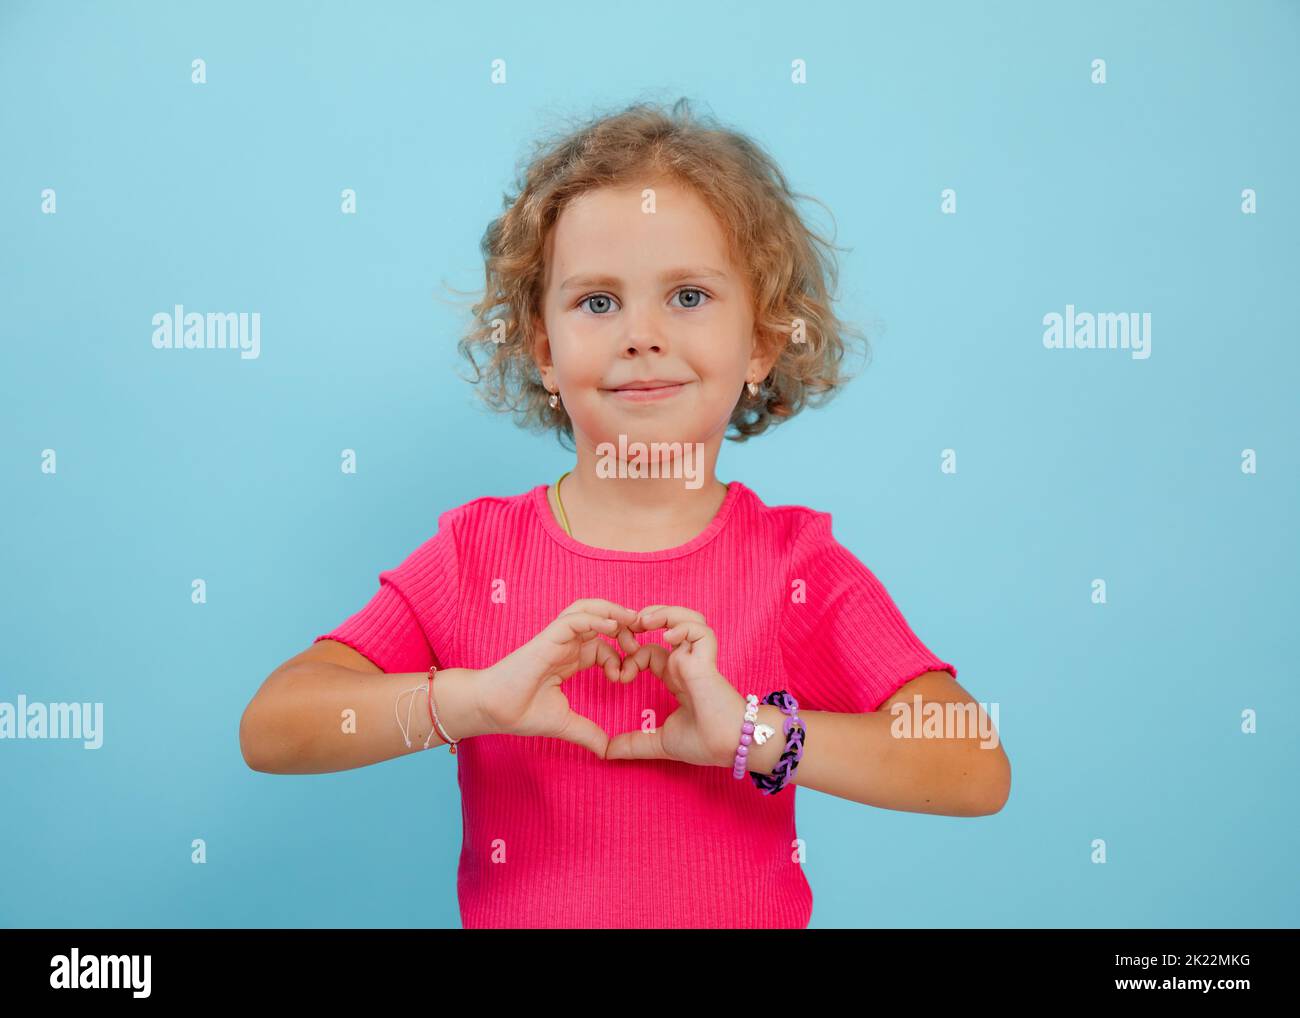 Small expressive, confident, playful, positive curly blonde girl showing heart sign by hands. Love and care. Copy space Stock Photo